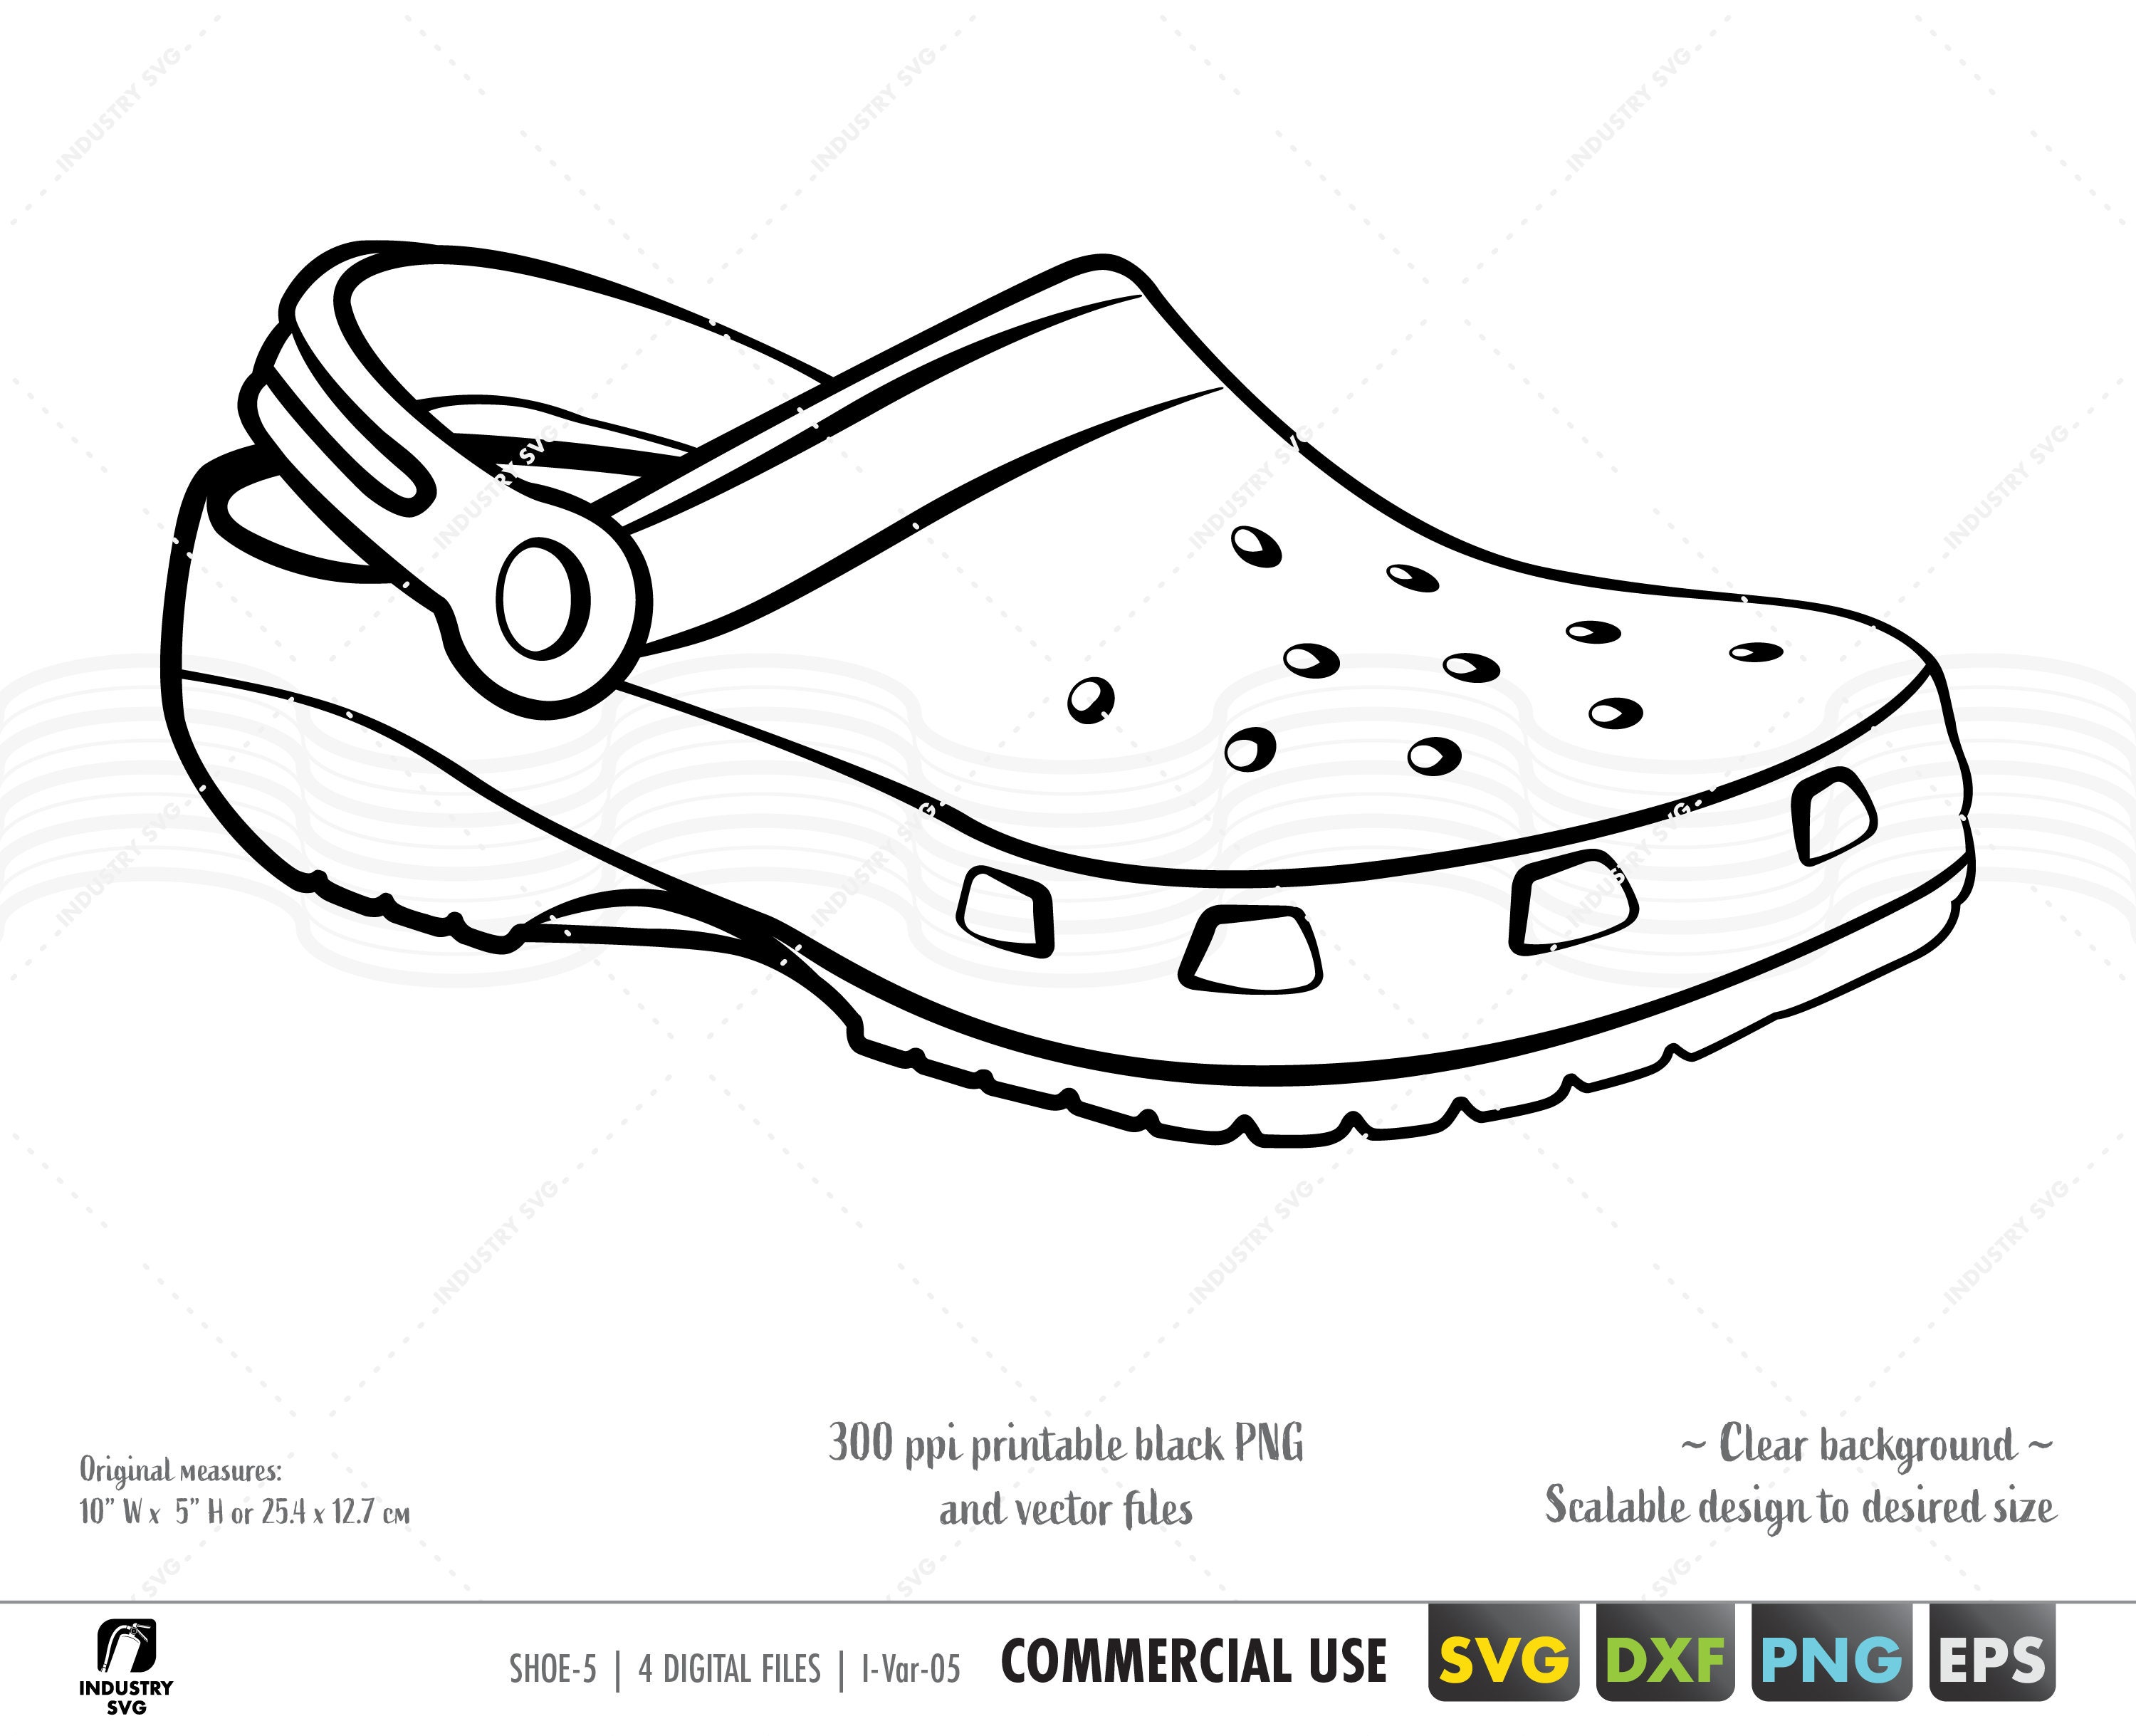 Clog Shoes Svg Dxf Eps Country Shoes Svg Clog Sandals - Etsy Hong Kong